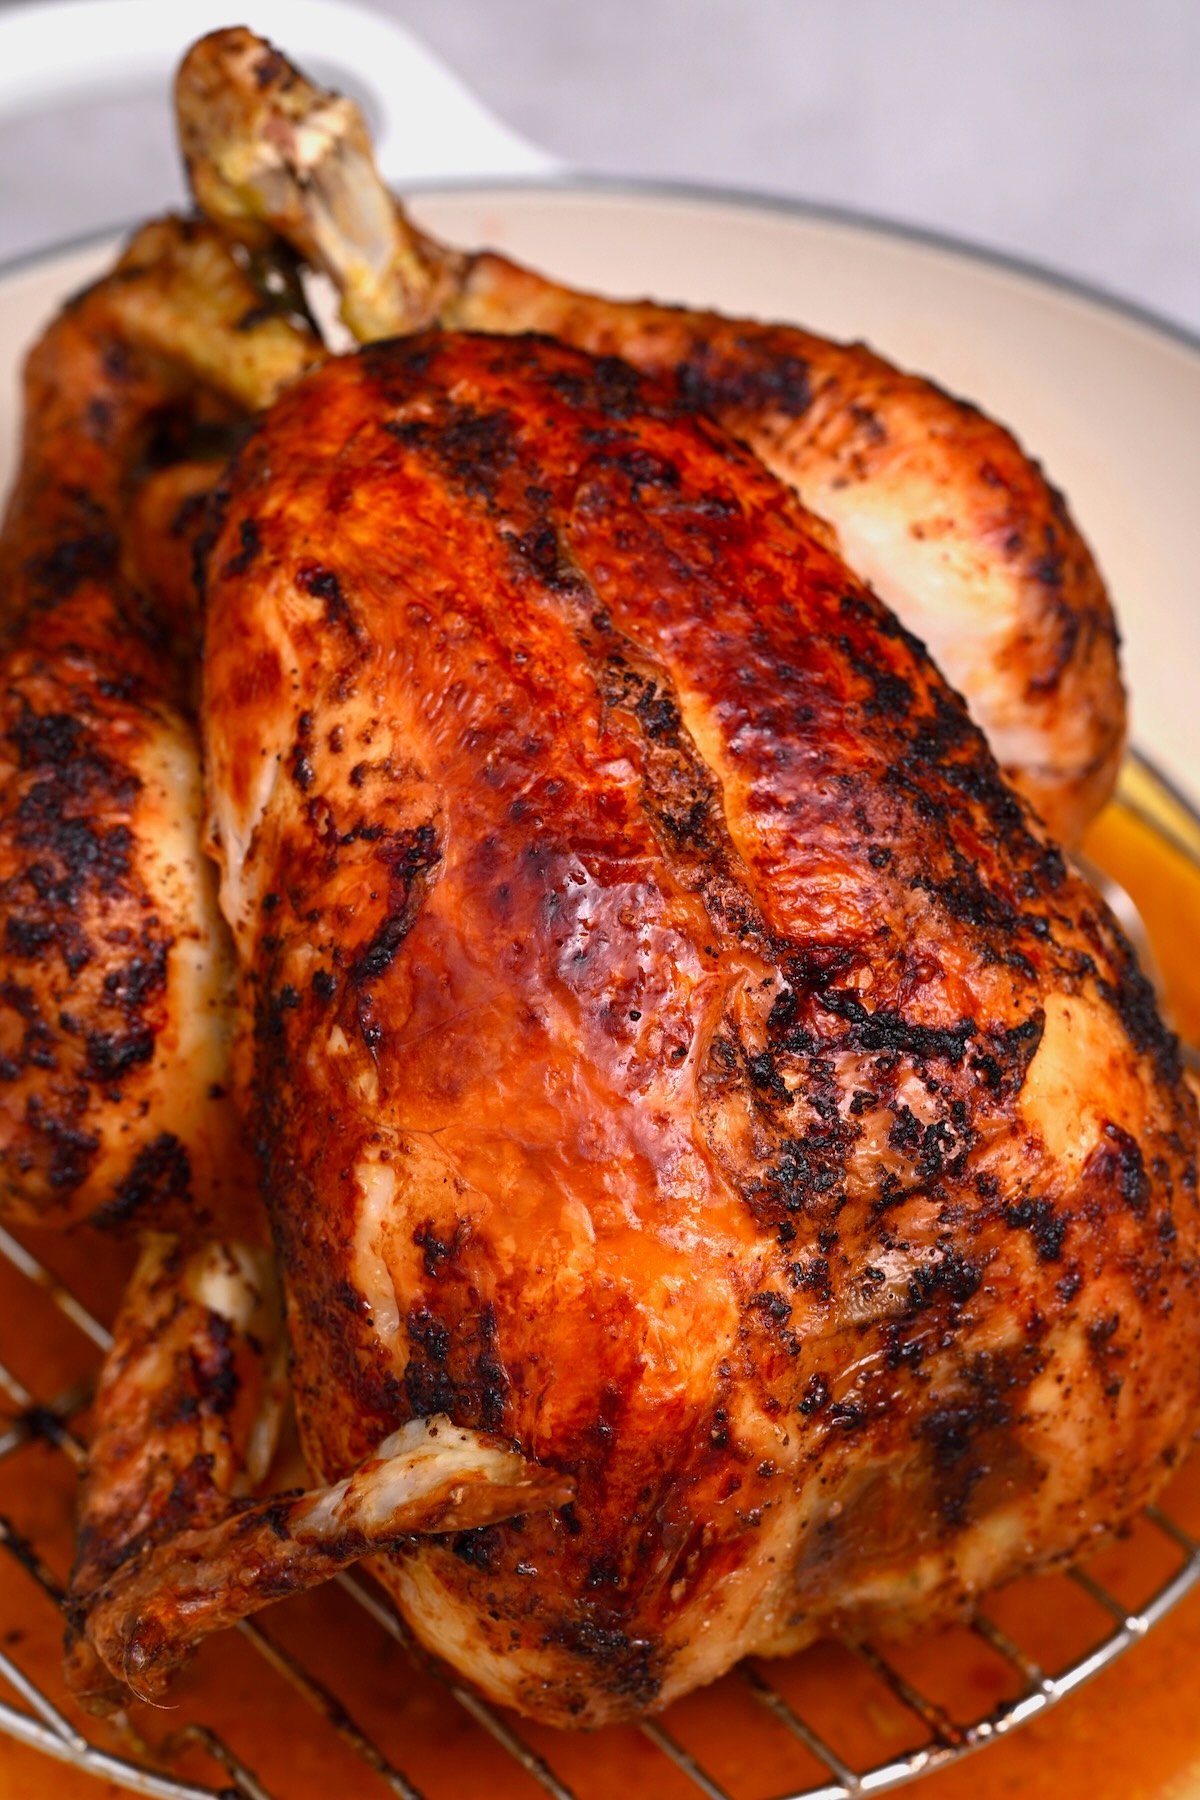 A whole brined and roasted chicken